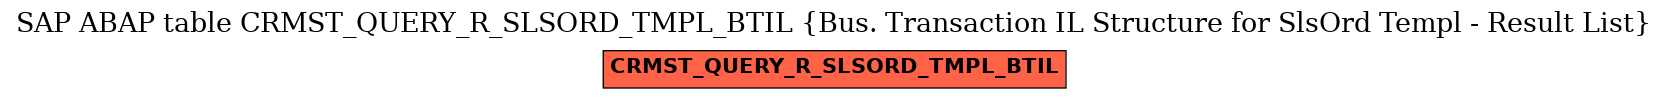 E-R Diagram for table CRMST_QUERY_R_SLSORD_TMPL_BTIL (Bus. Transaction IL Structure for SlsOrd Templ - Result List)